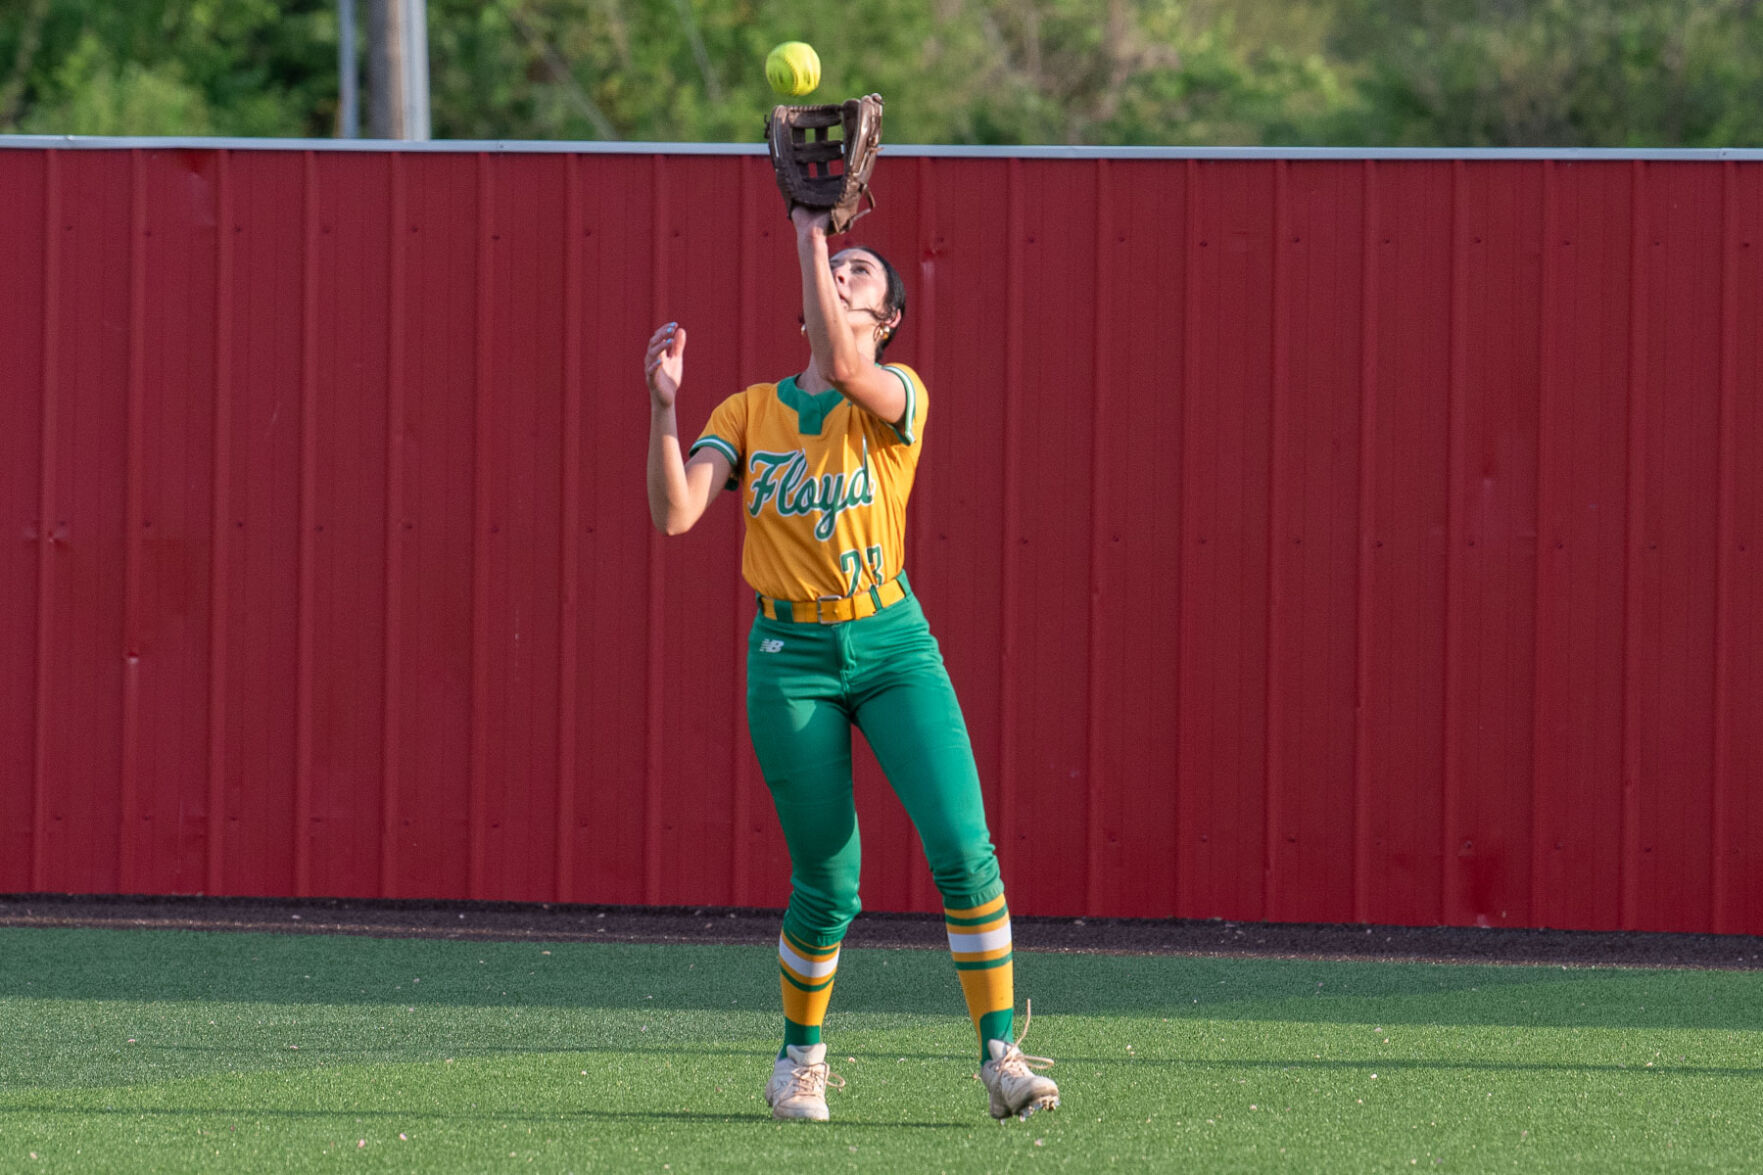 Saturday Softball Recap: Floyd Central Wins Doubleheader, Addy Ware Shines in Plate